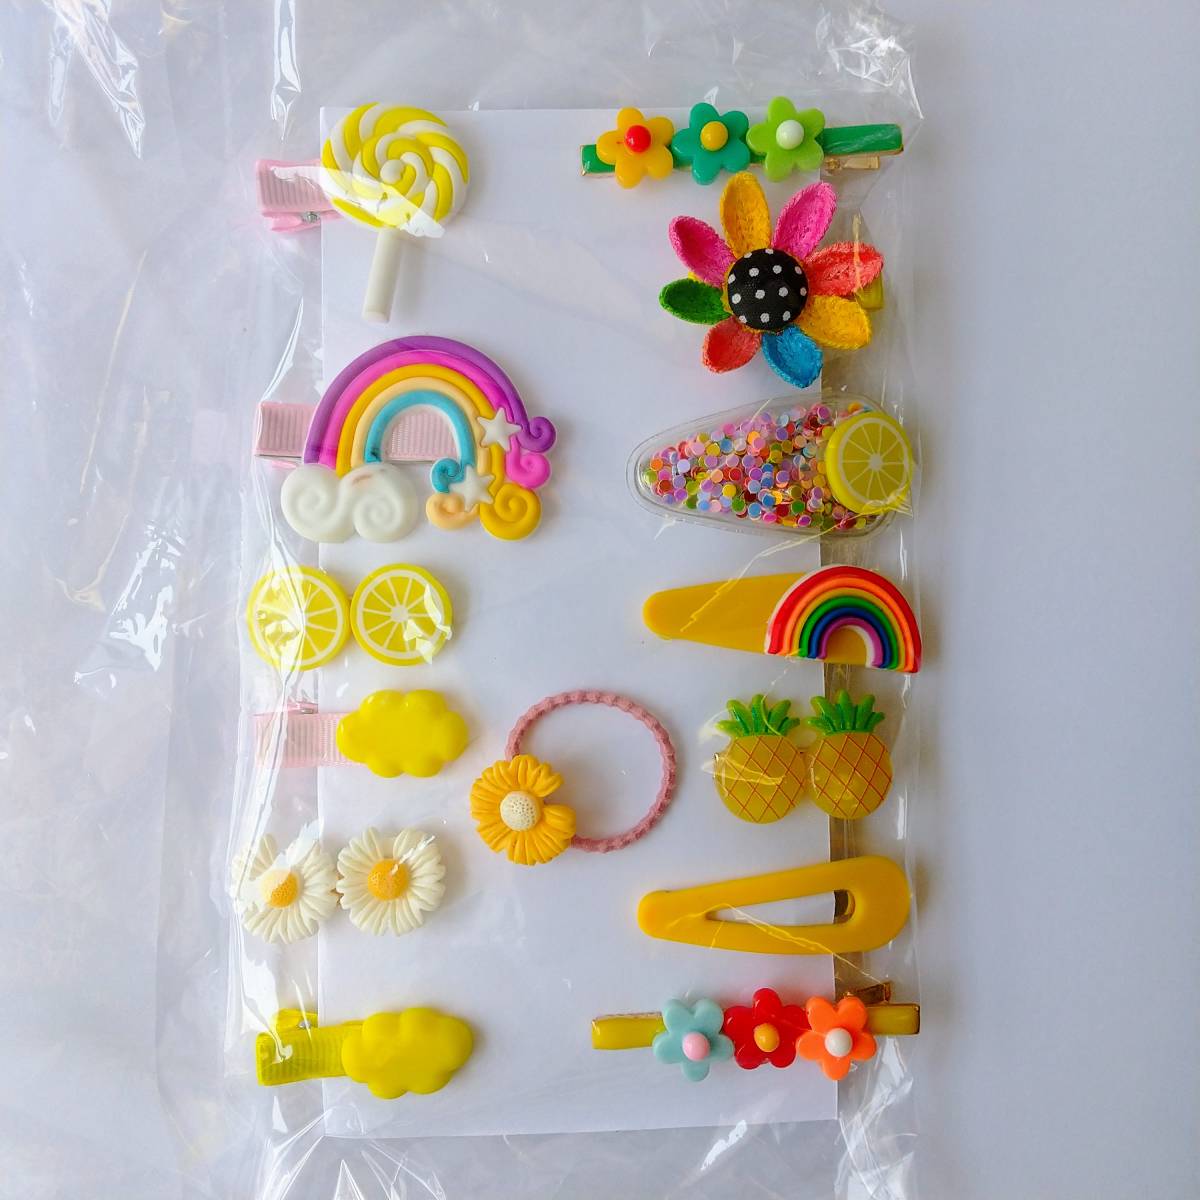 *SALE* unused goods * Kids hair accessory 14 point set * yellow * hair clip * hairpin * hair ornament * accessory 